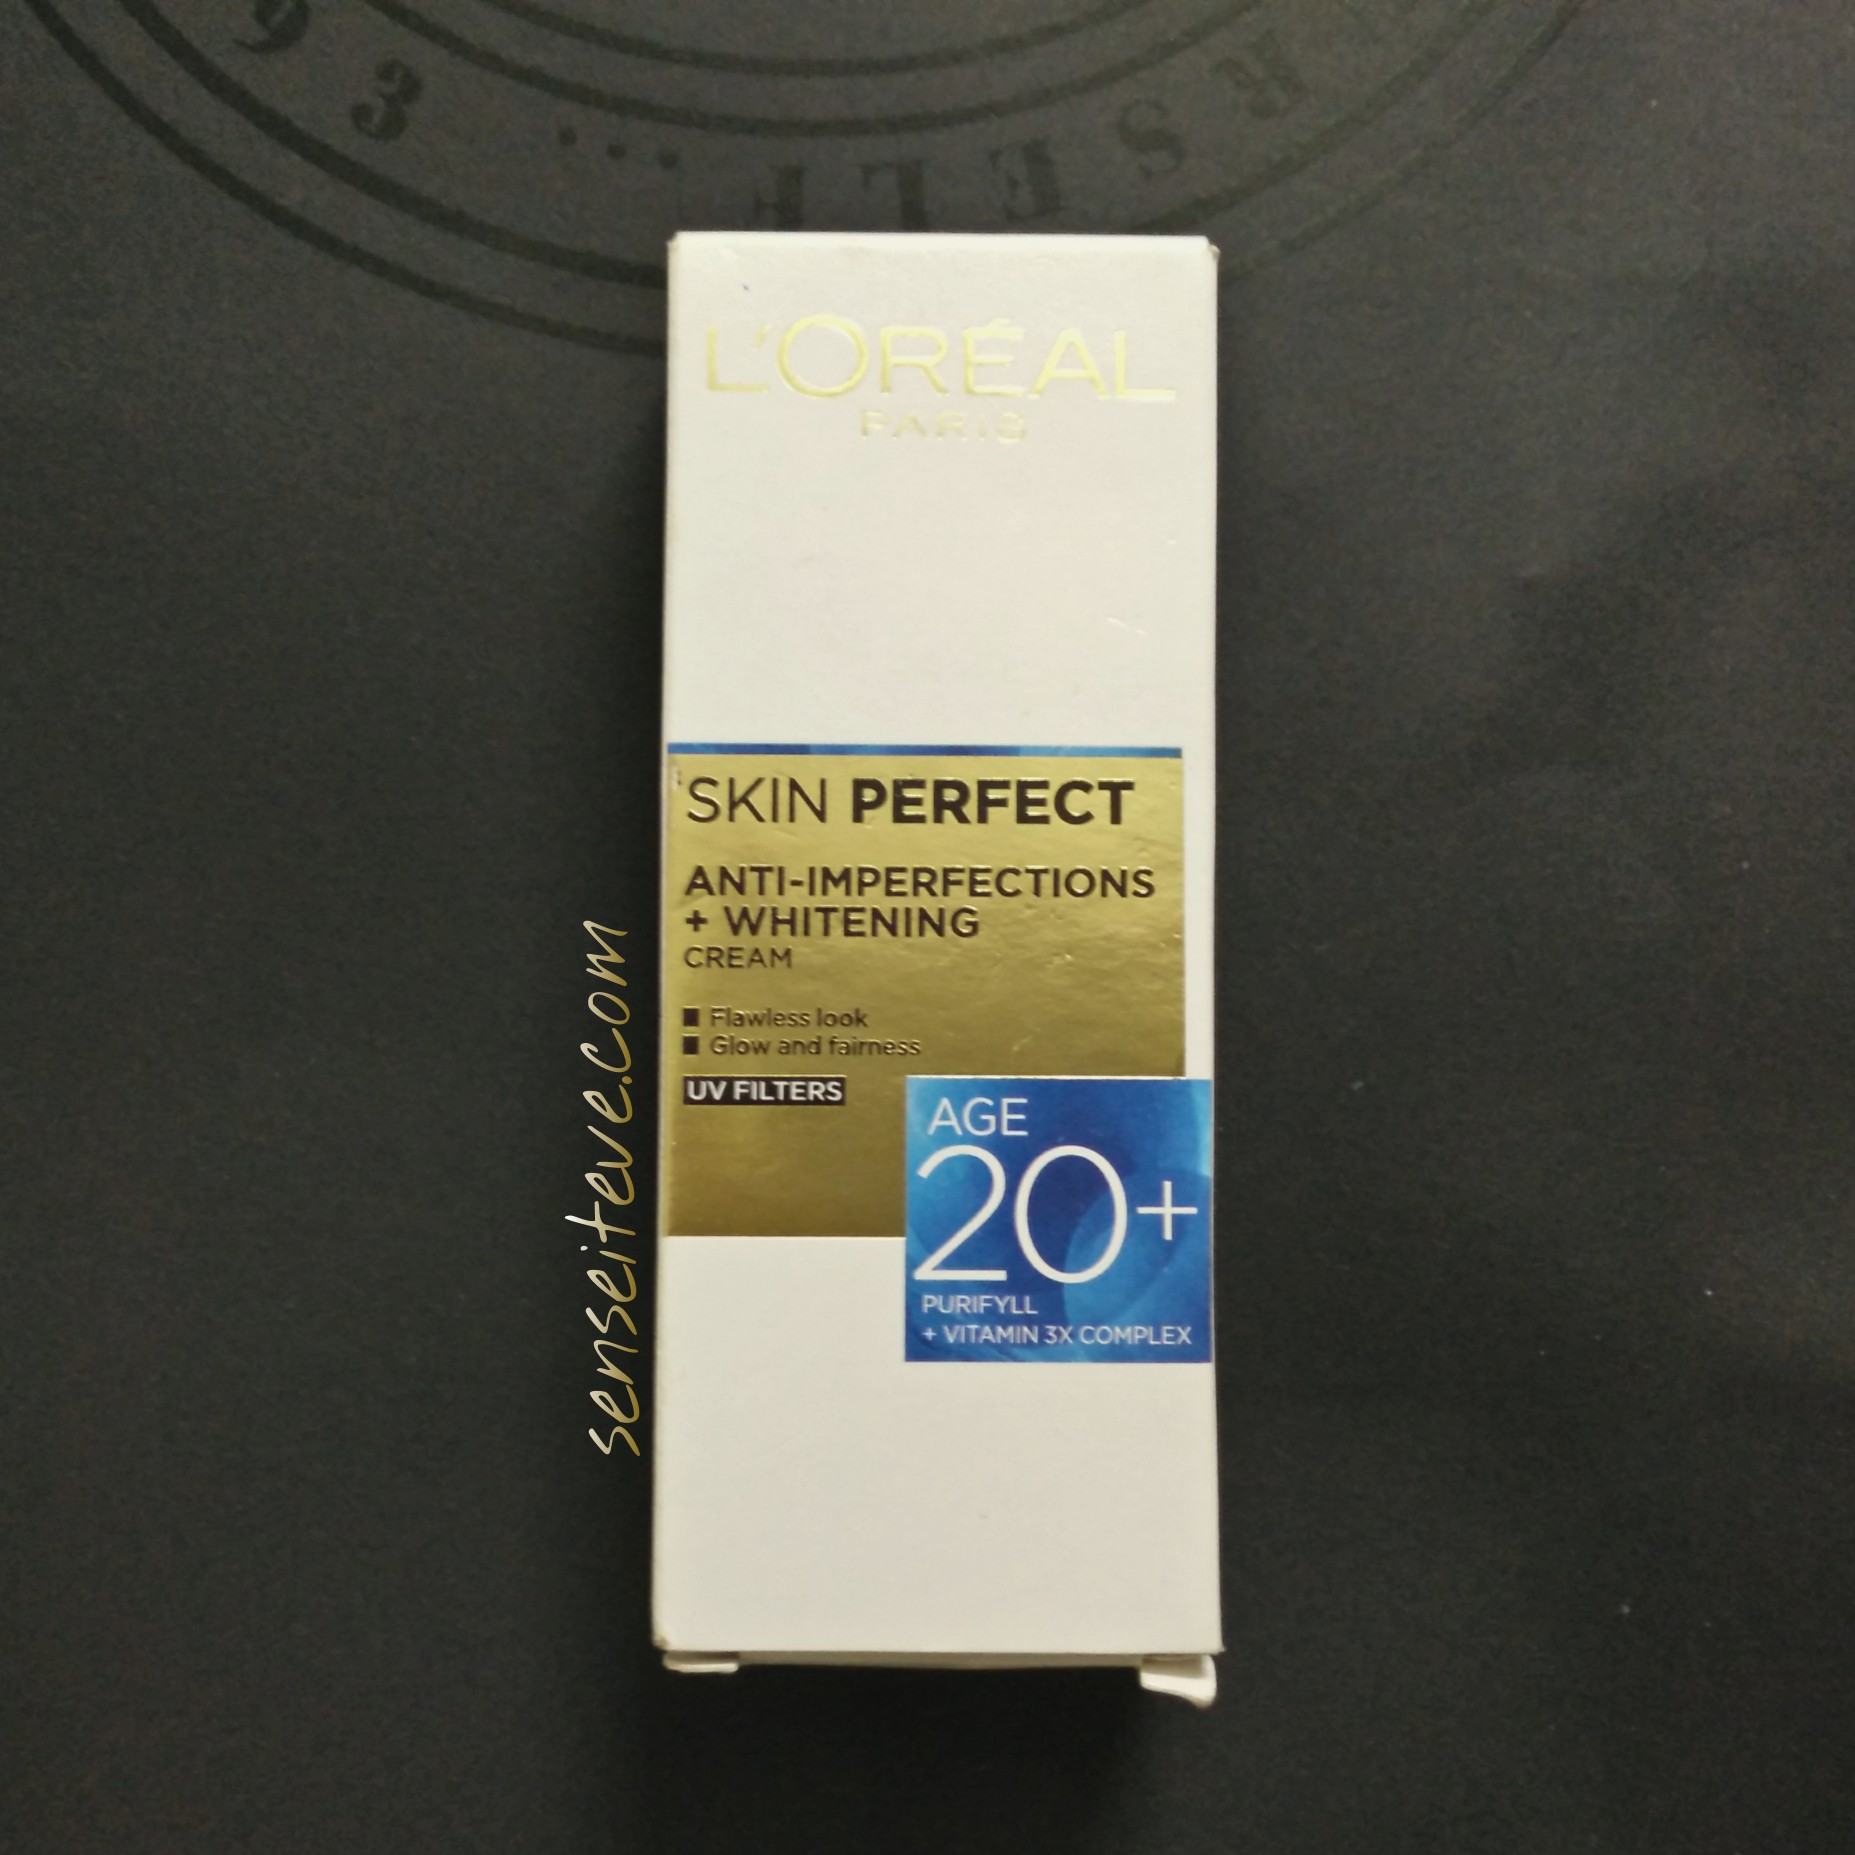 Loreal-Paris-Skin-Perfect-Anti-inperfections-Whitening-Cream-for-Age-20-Review